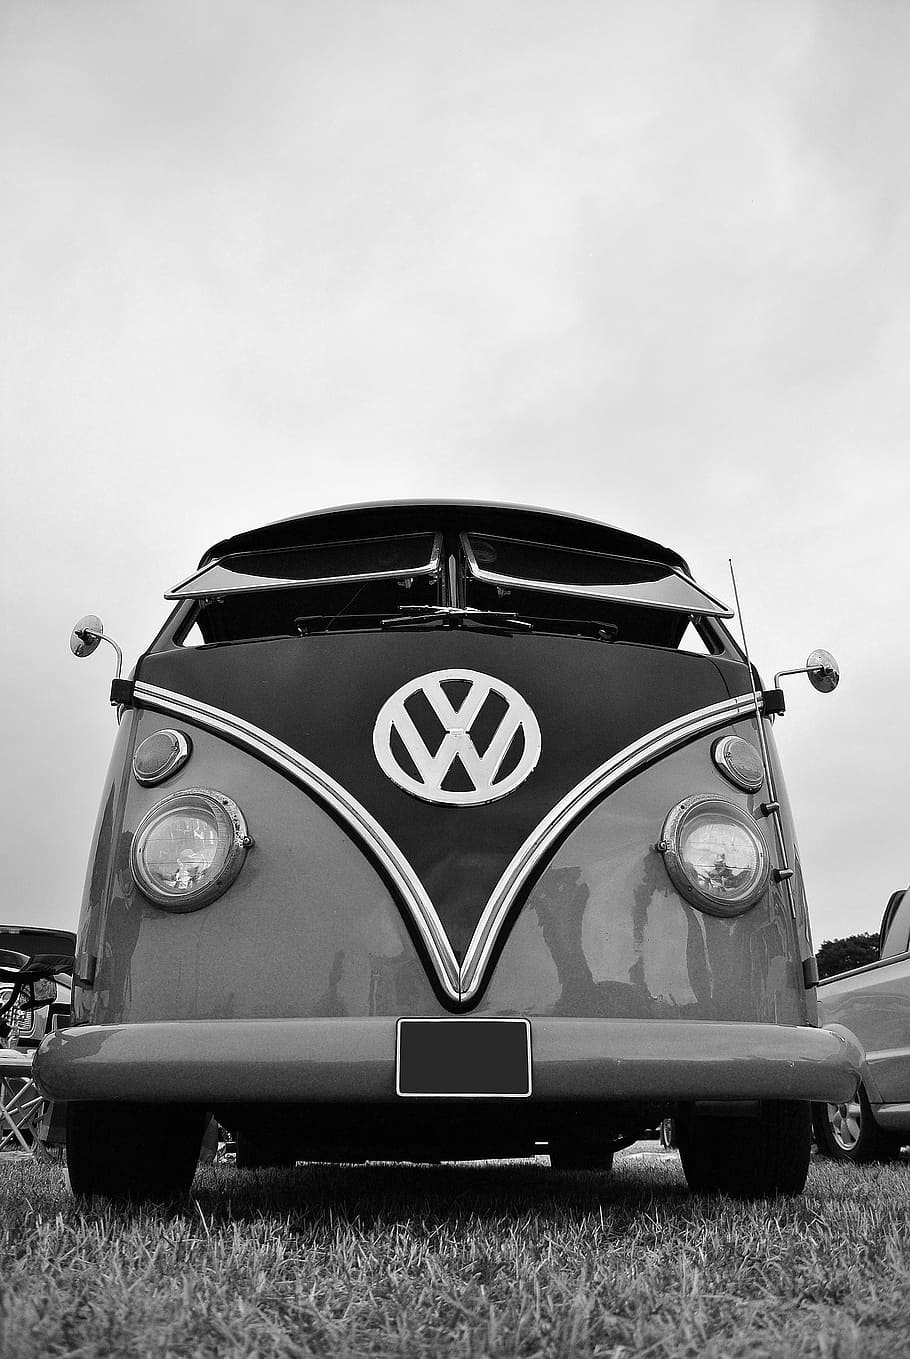 grayscale photography of Volkswagen bus, vw camper, vintage car